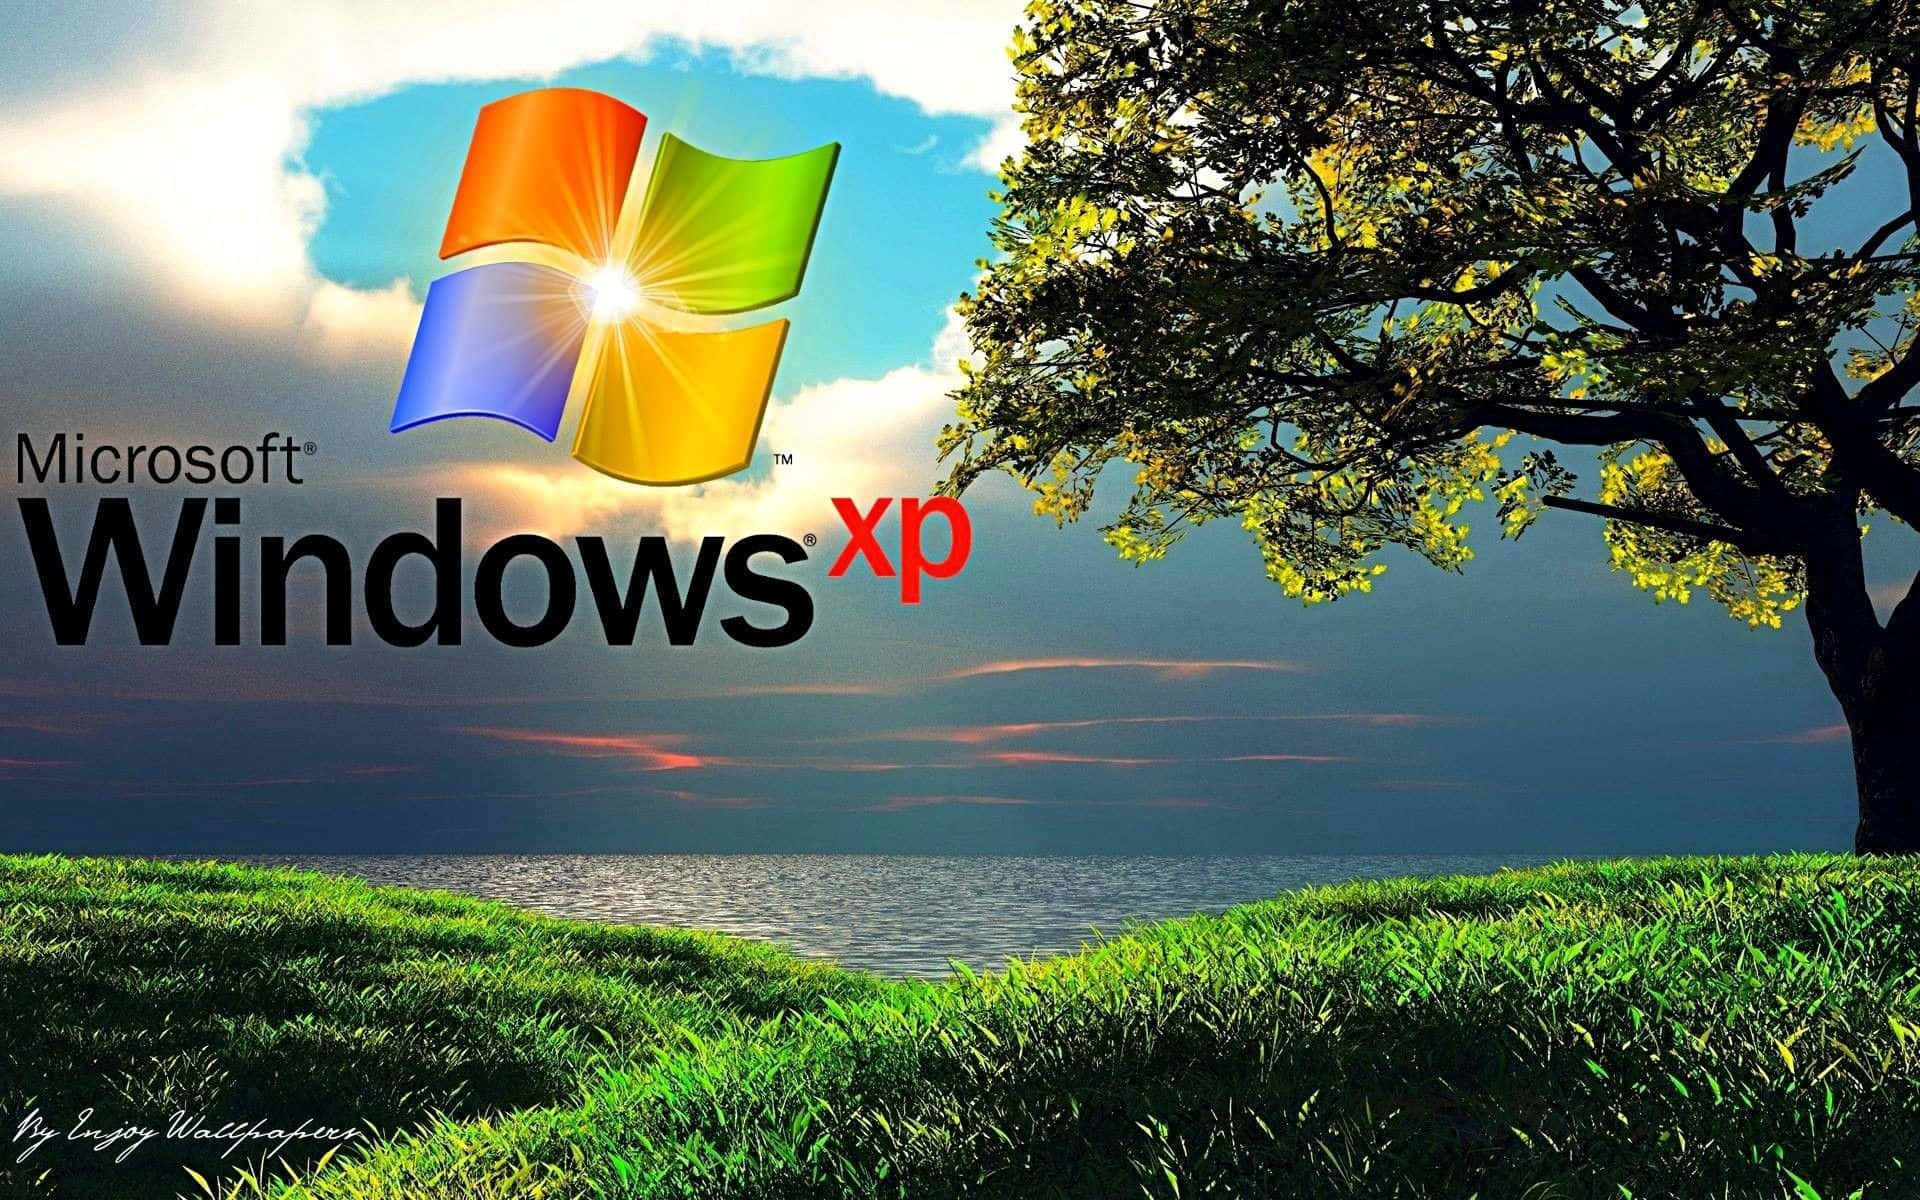 Microsoft Windows Xp Logo With A Tree In The Background